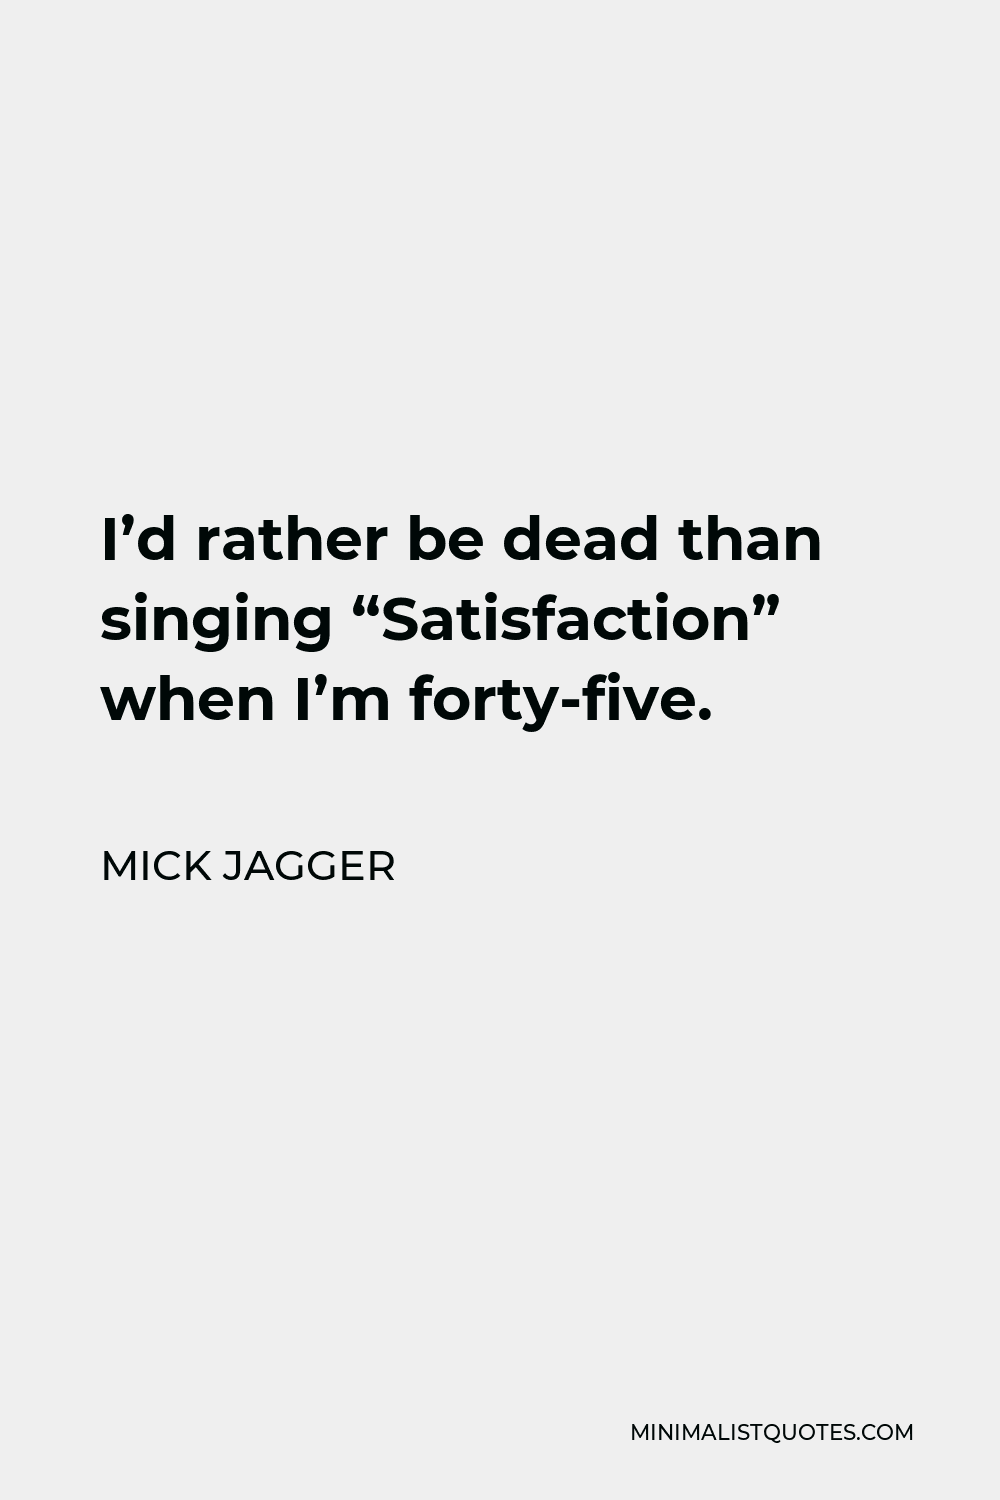 Mick Jagger Quote - I’d rather be dead than singing “Satisfaction” when I’m forty-five.